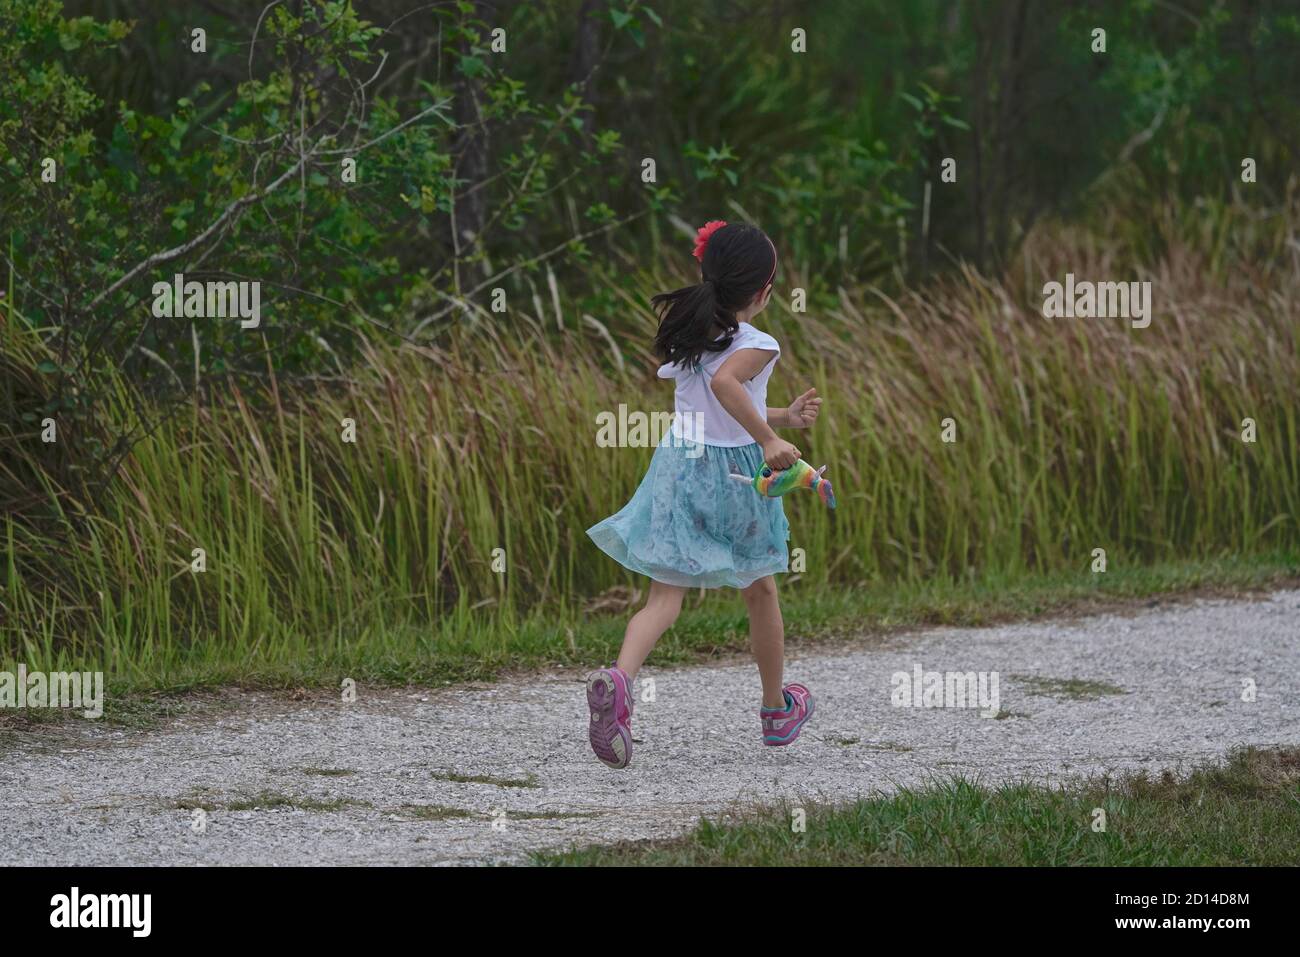 Five year old girl running on a trail. Stock Photo